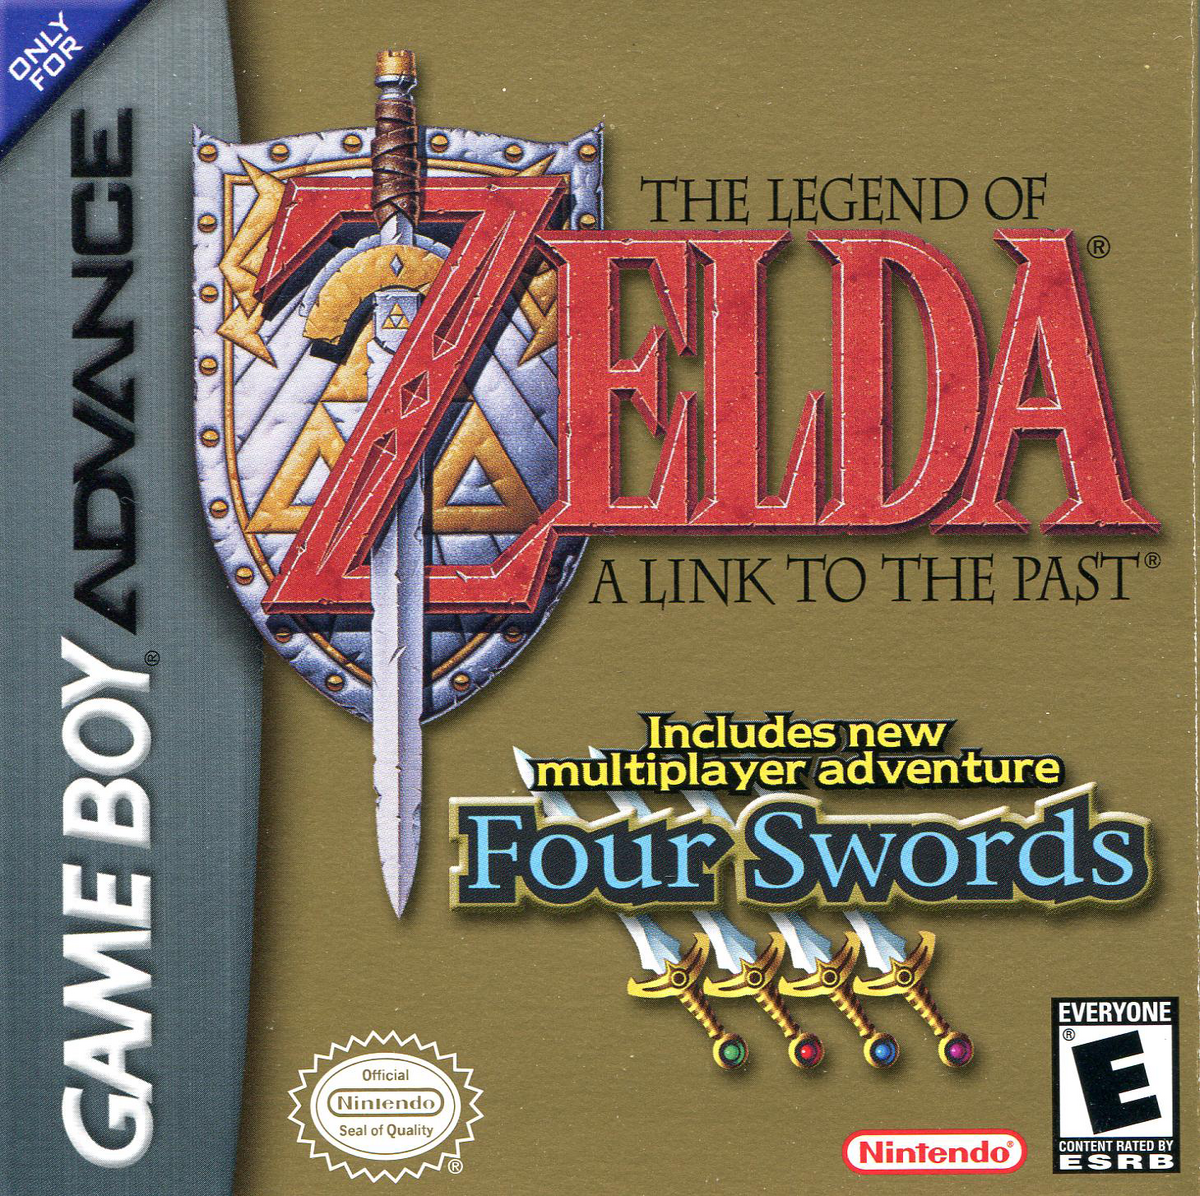 the legend of zelda a link to the past 3ds